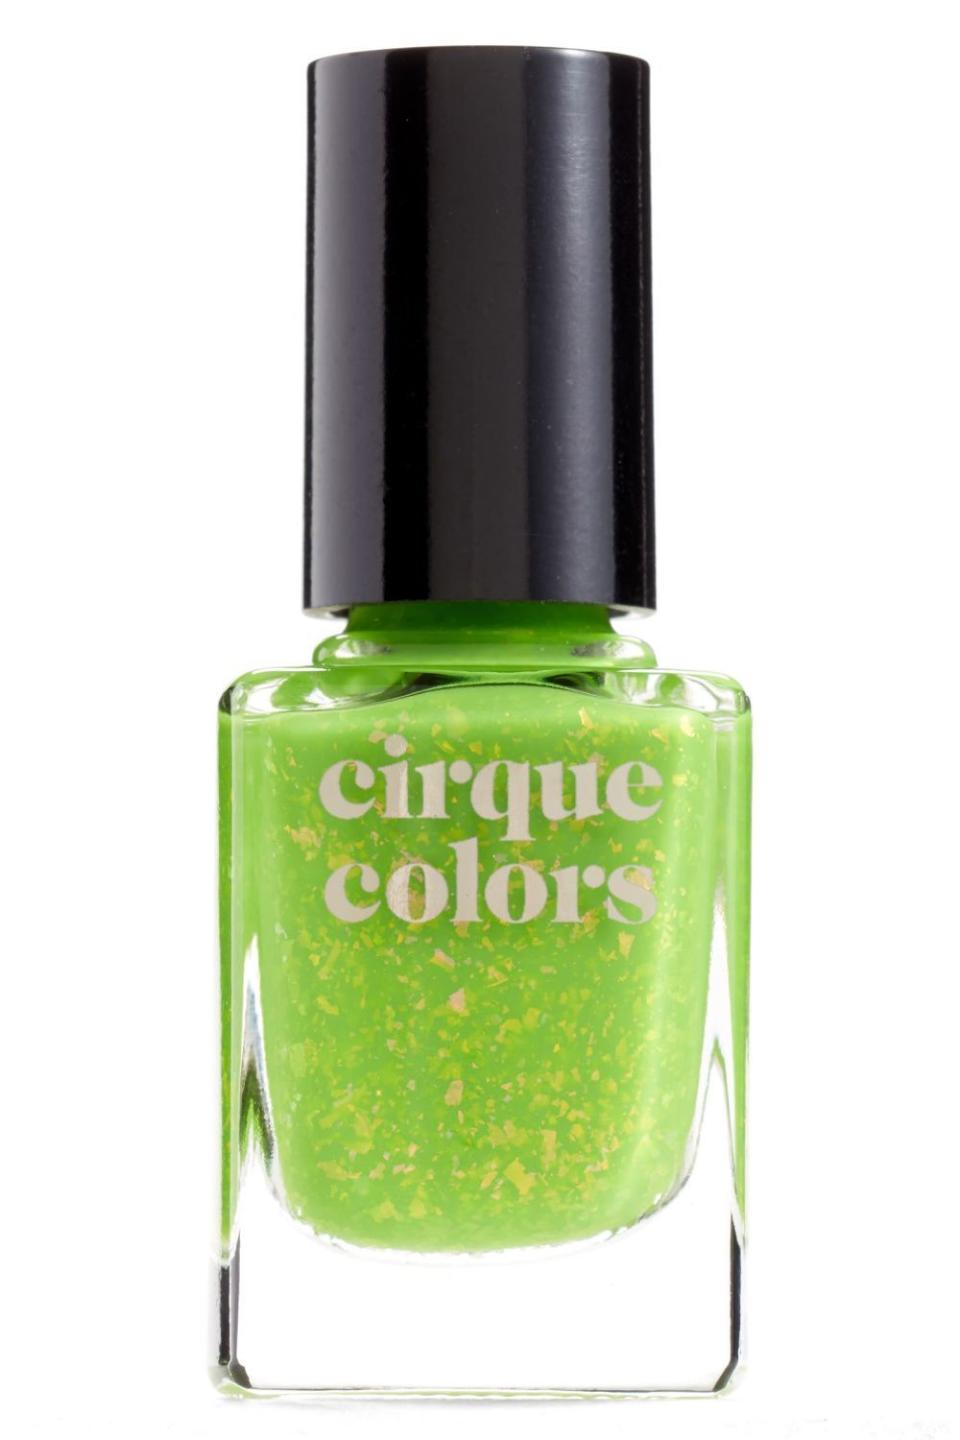 13) Cirque Colors Iridescent Nail Polish in Sour Punch